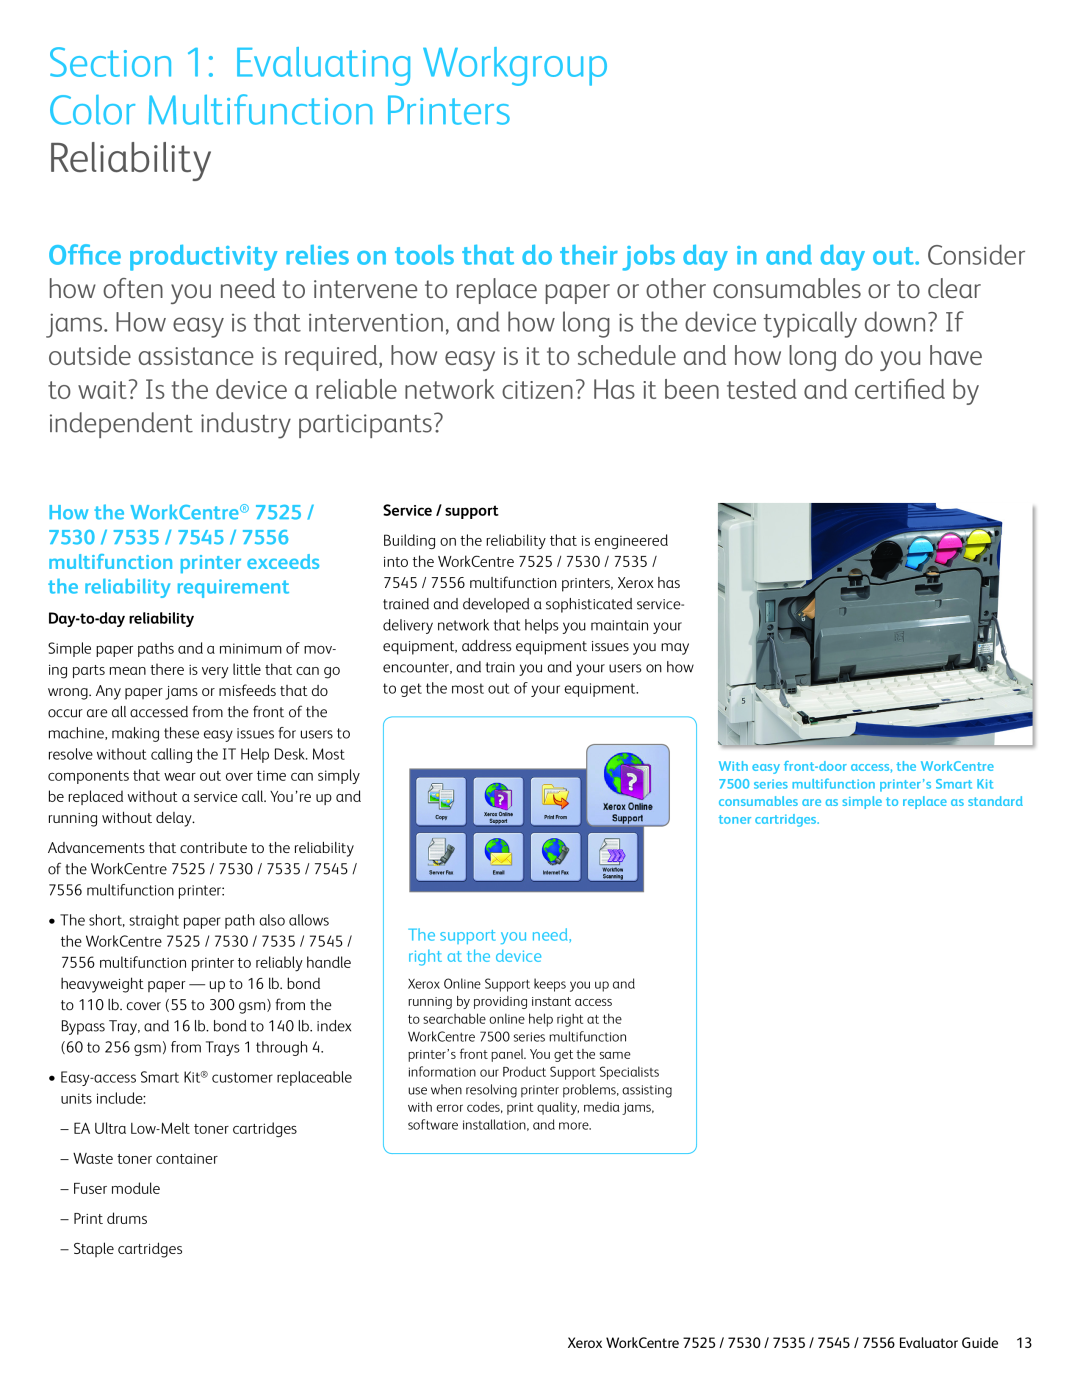 Xerox 7545, 7525 Reliability, The support you need, right at the device, Day-to-day reliability, multifunction printer 